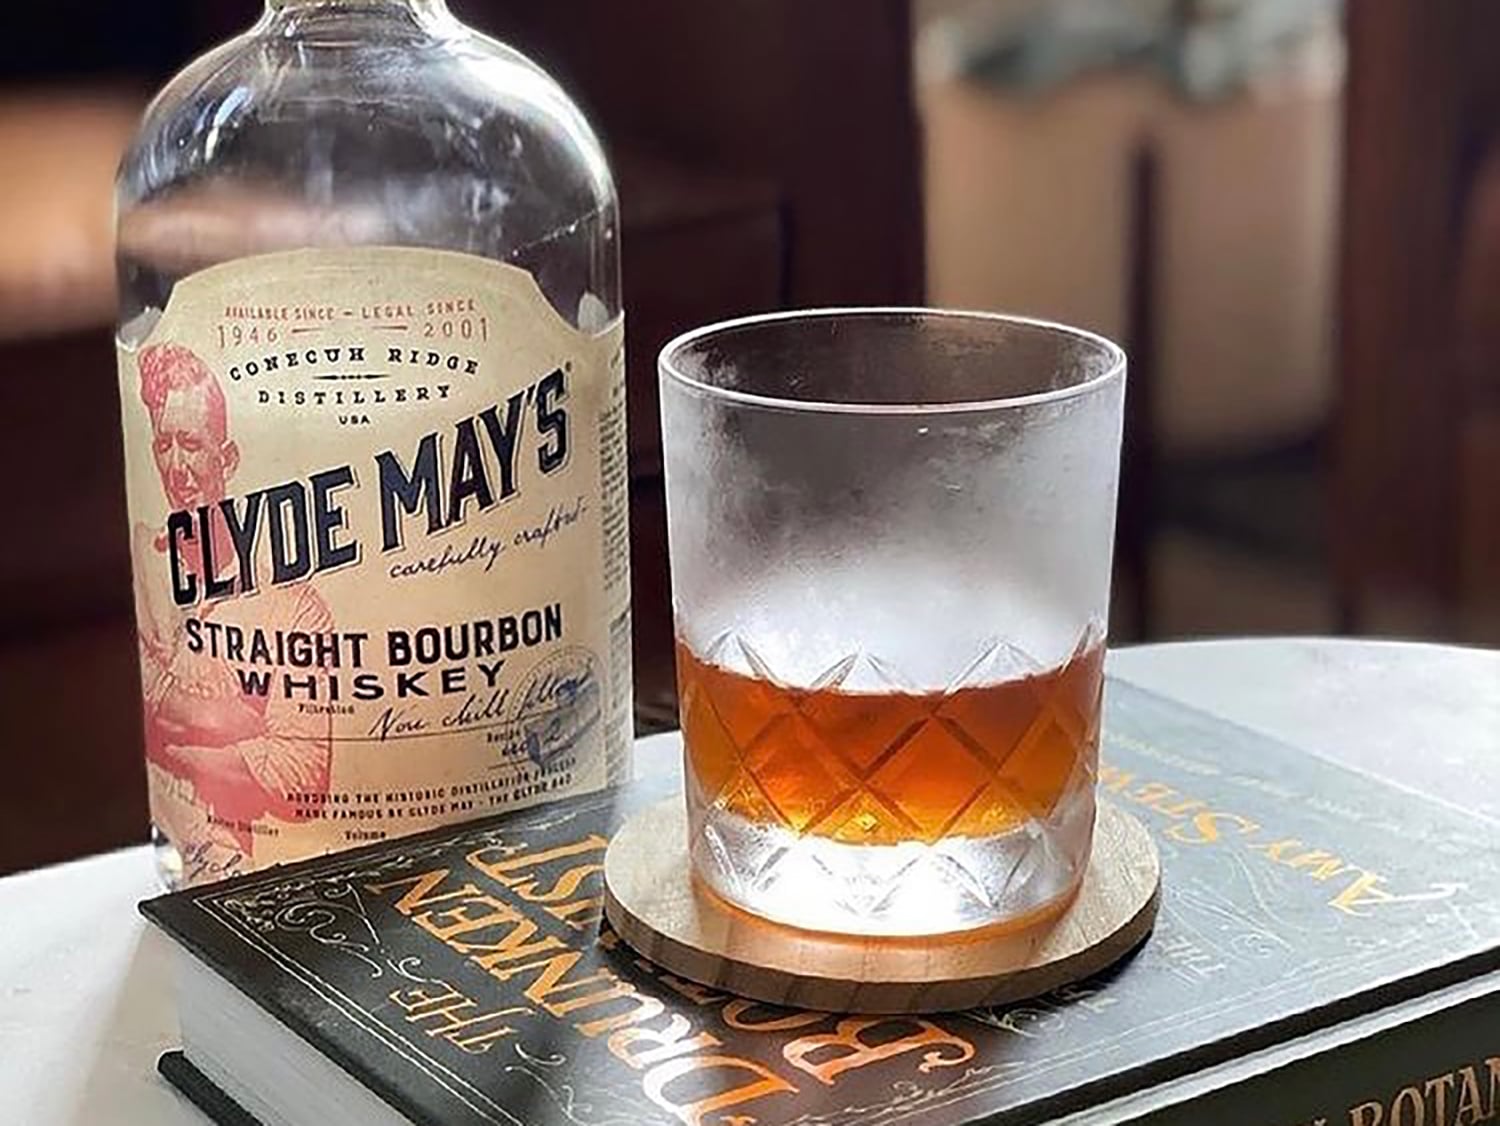 The Sweet Summer Heat cocktail from Clyde May's Whiskey.